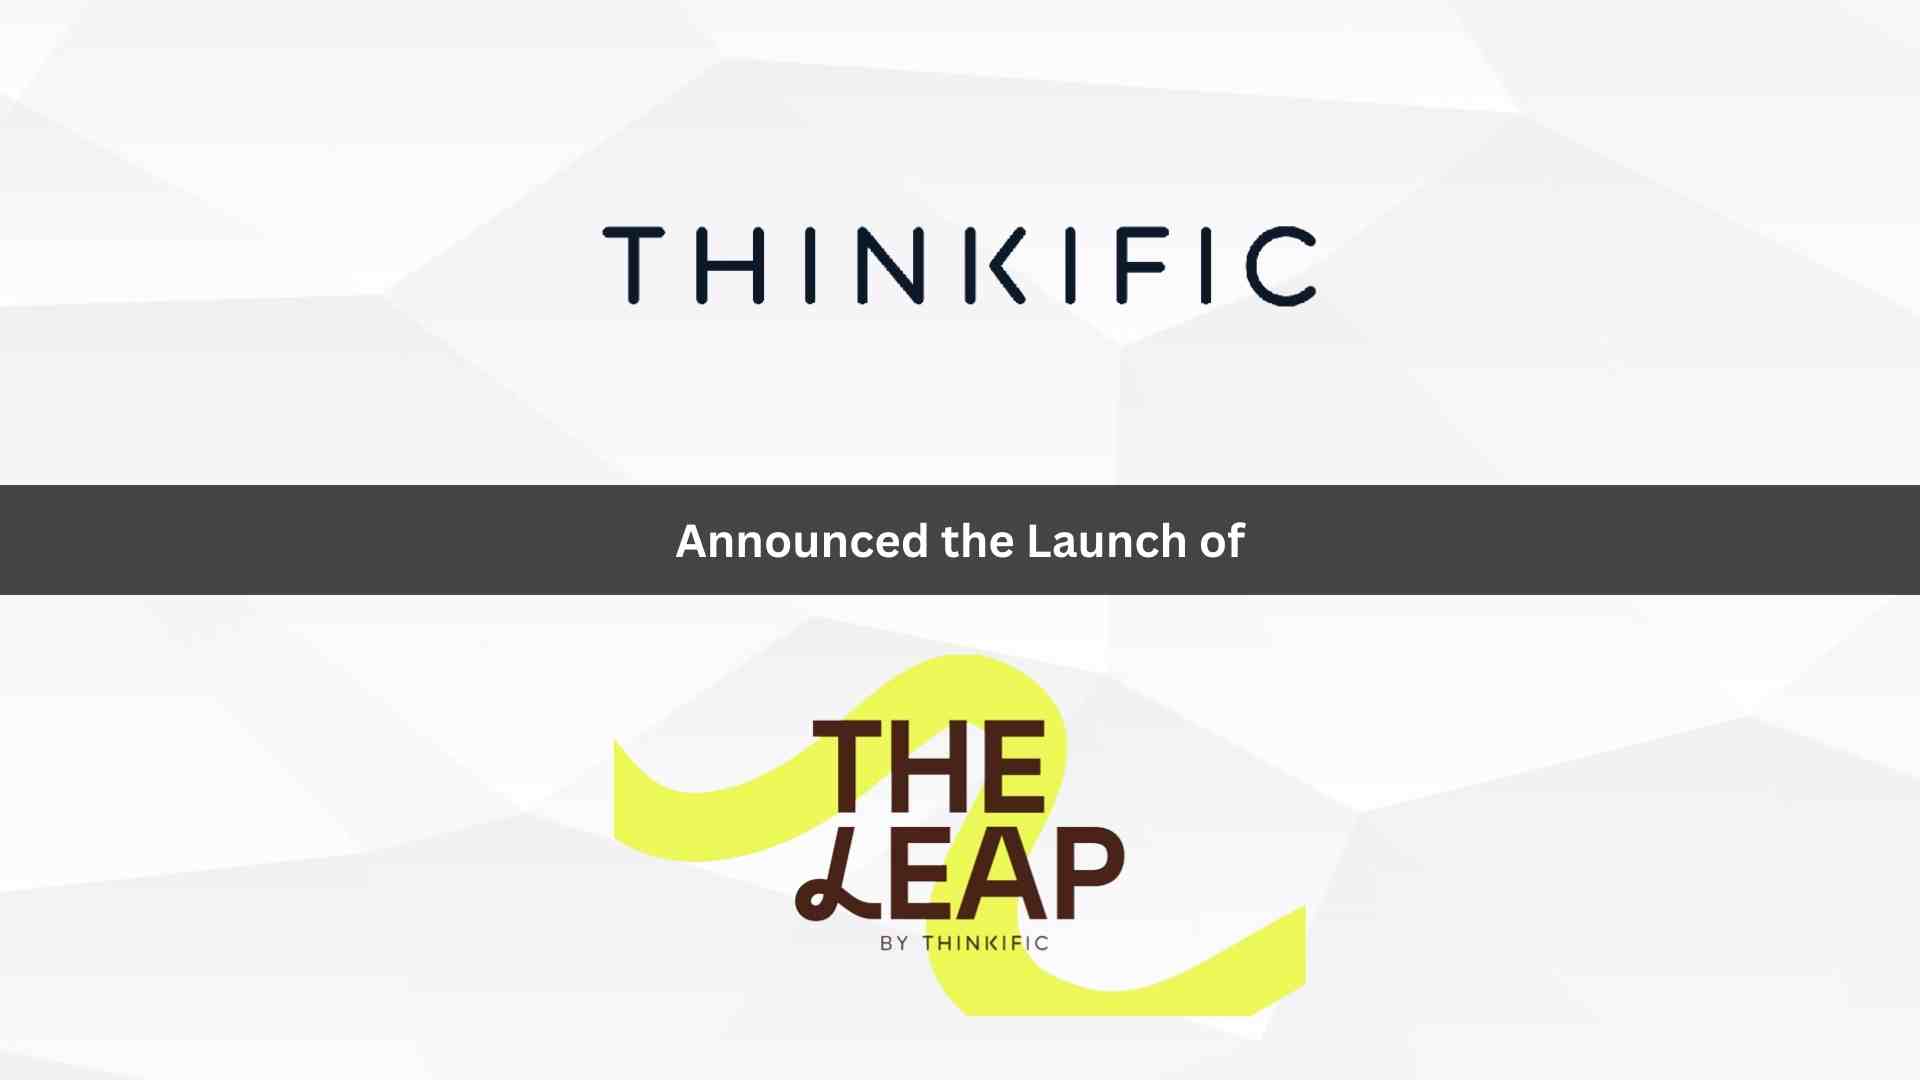 Thinkific's Fast Growth Media Property 'The Leap' Debuts AI Tool Allowing Creators to Build and Sell Digital Products in Minutes